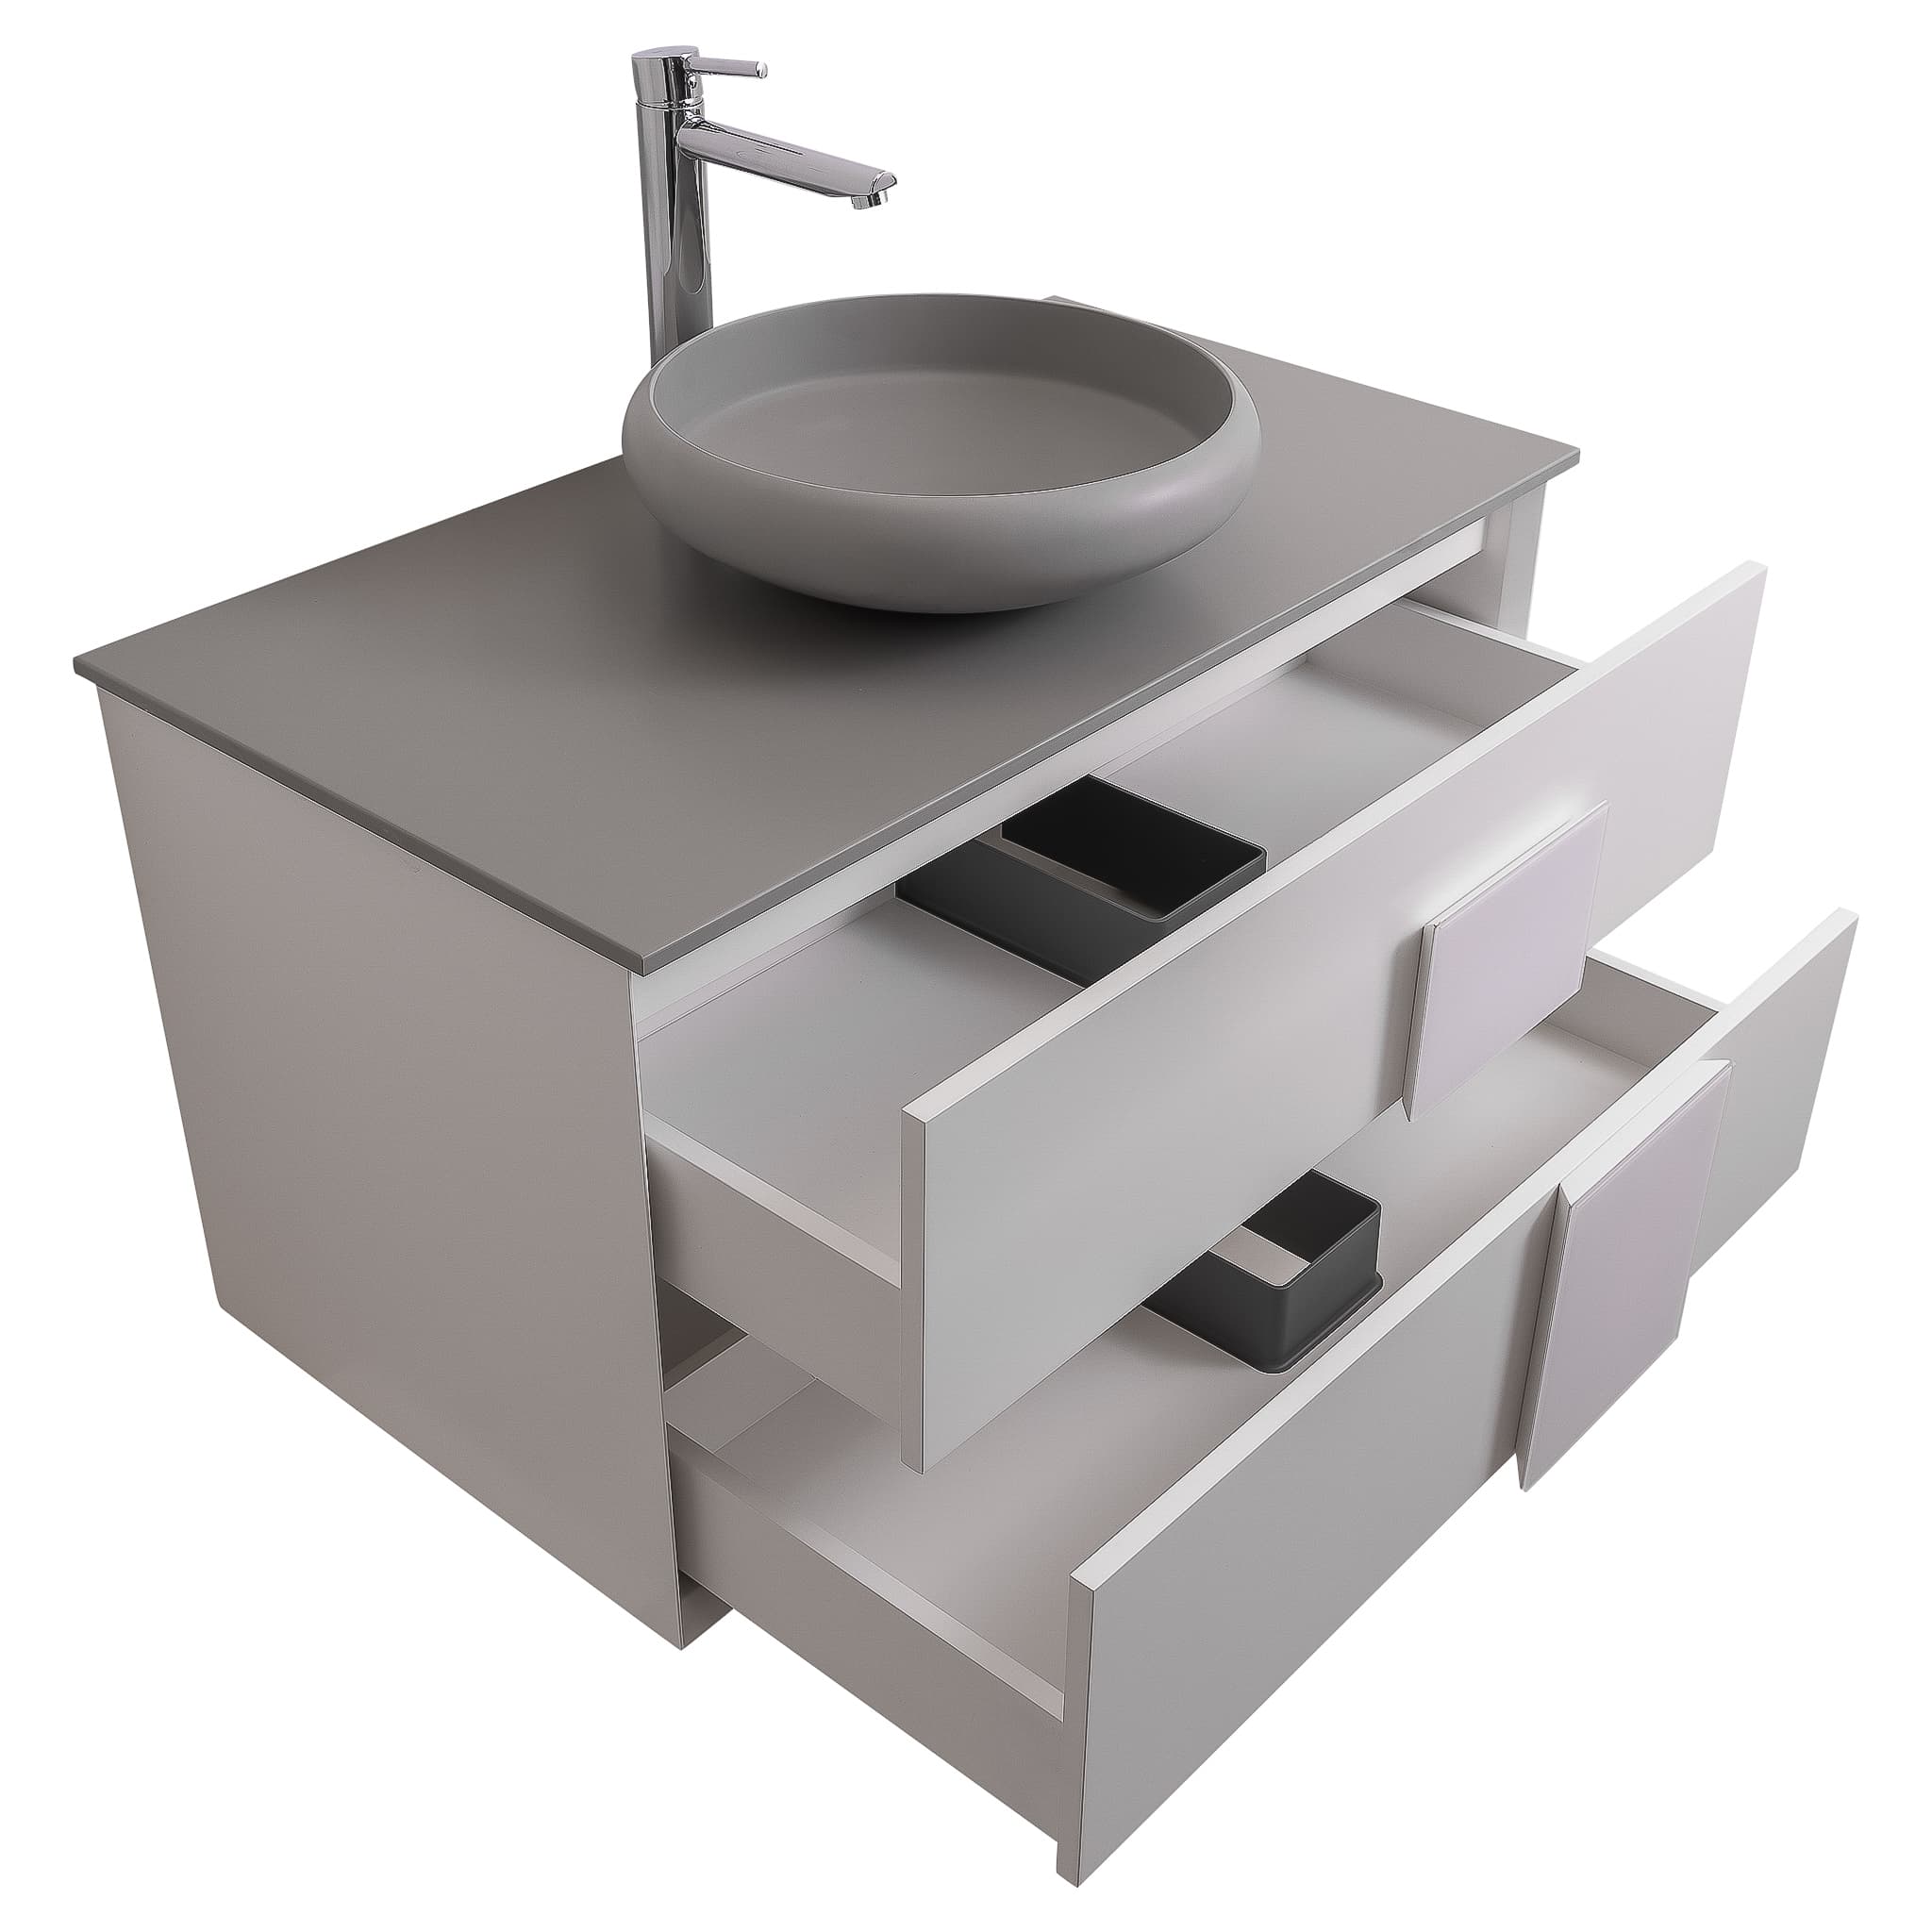 Piazza 31.5 Matte White With White Handle Cabinet, Solid Surface Flat Grey Counter and Round Solid Surface Grey Basin 1153, Wall Mounted Modern Vanity Set